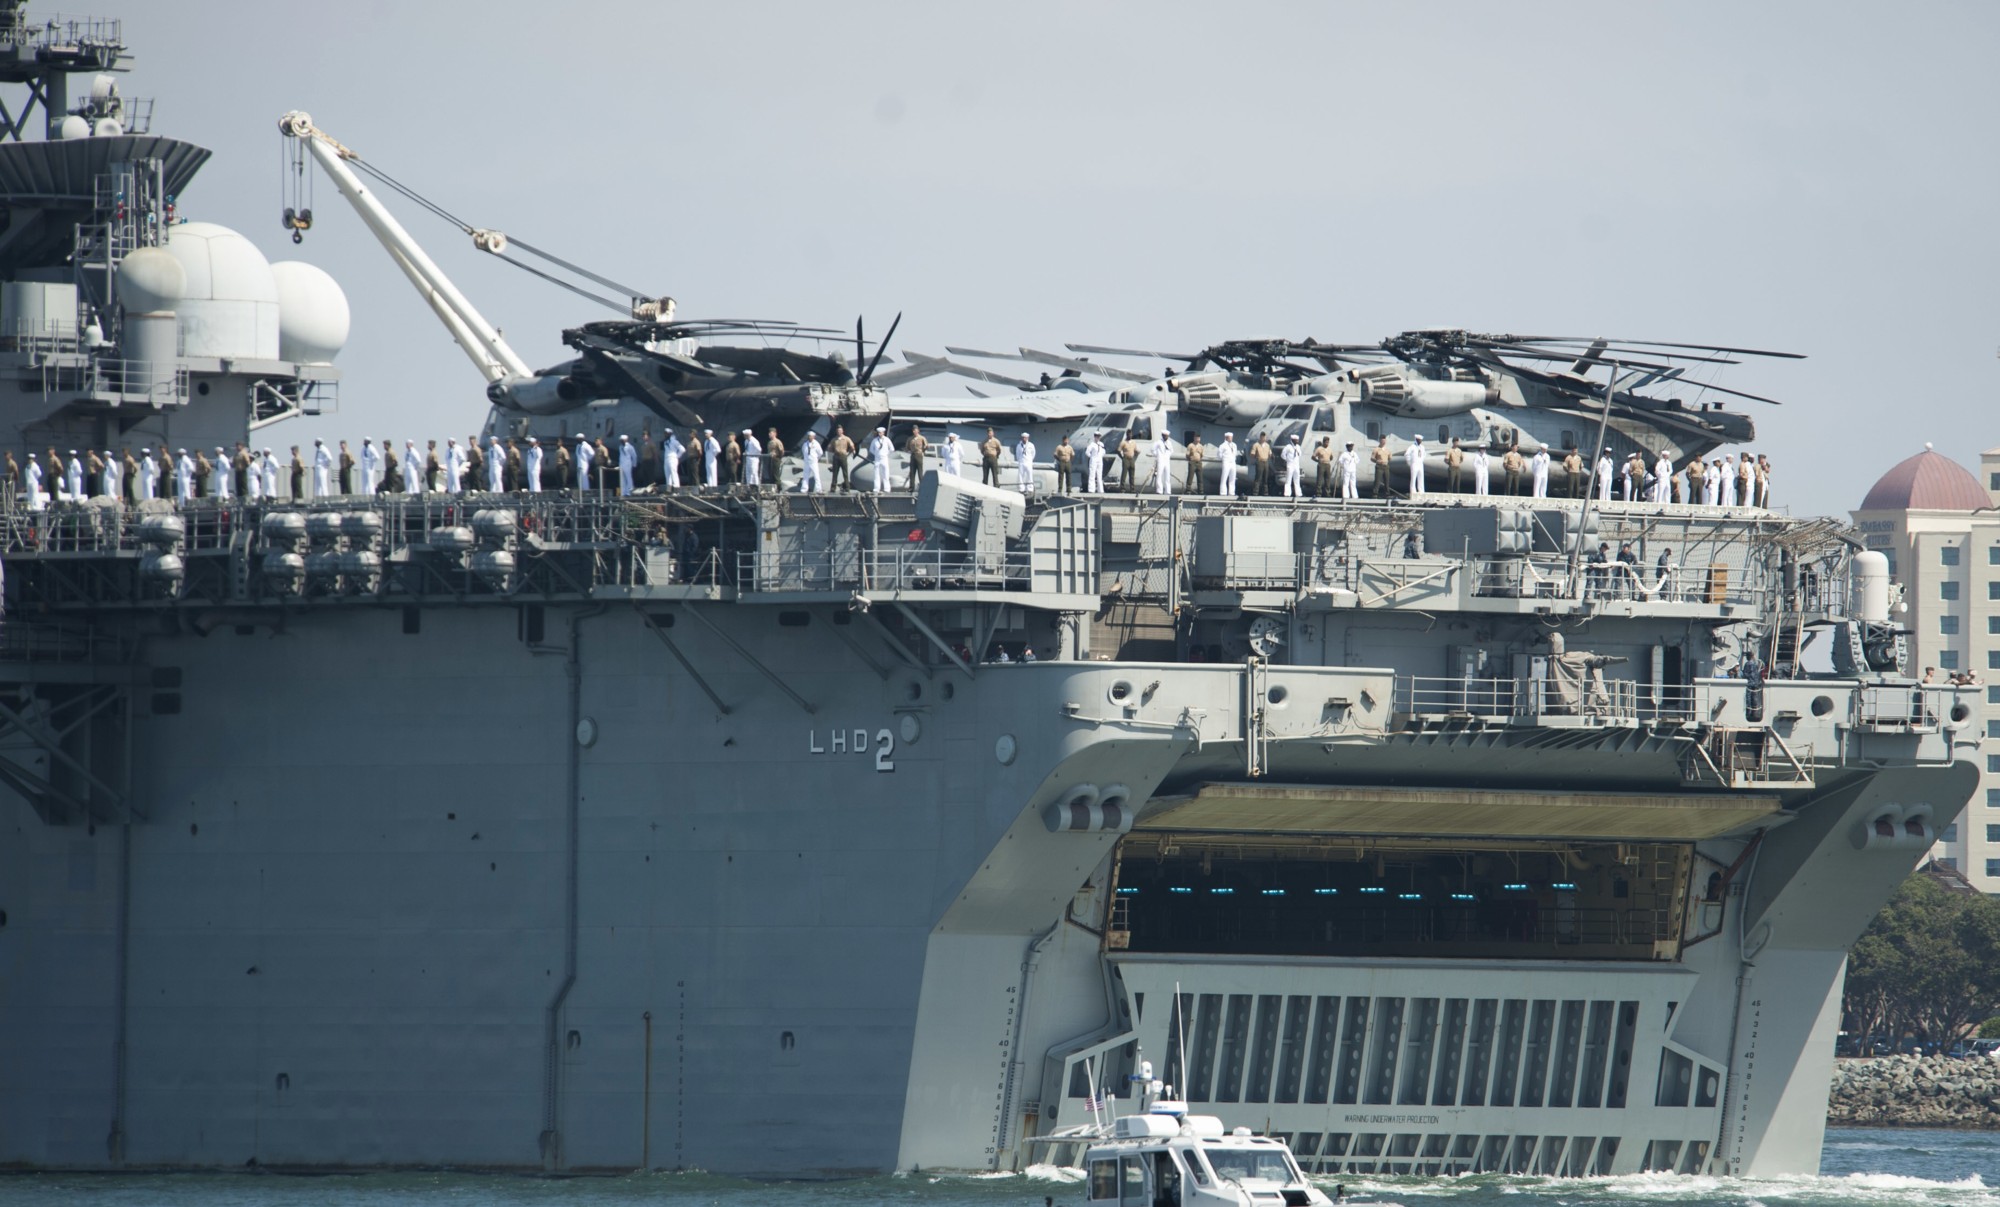 lhd-2 uss essex wasp class amphibious assault ship landing helicopter us navy departing naval base san diego 134